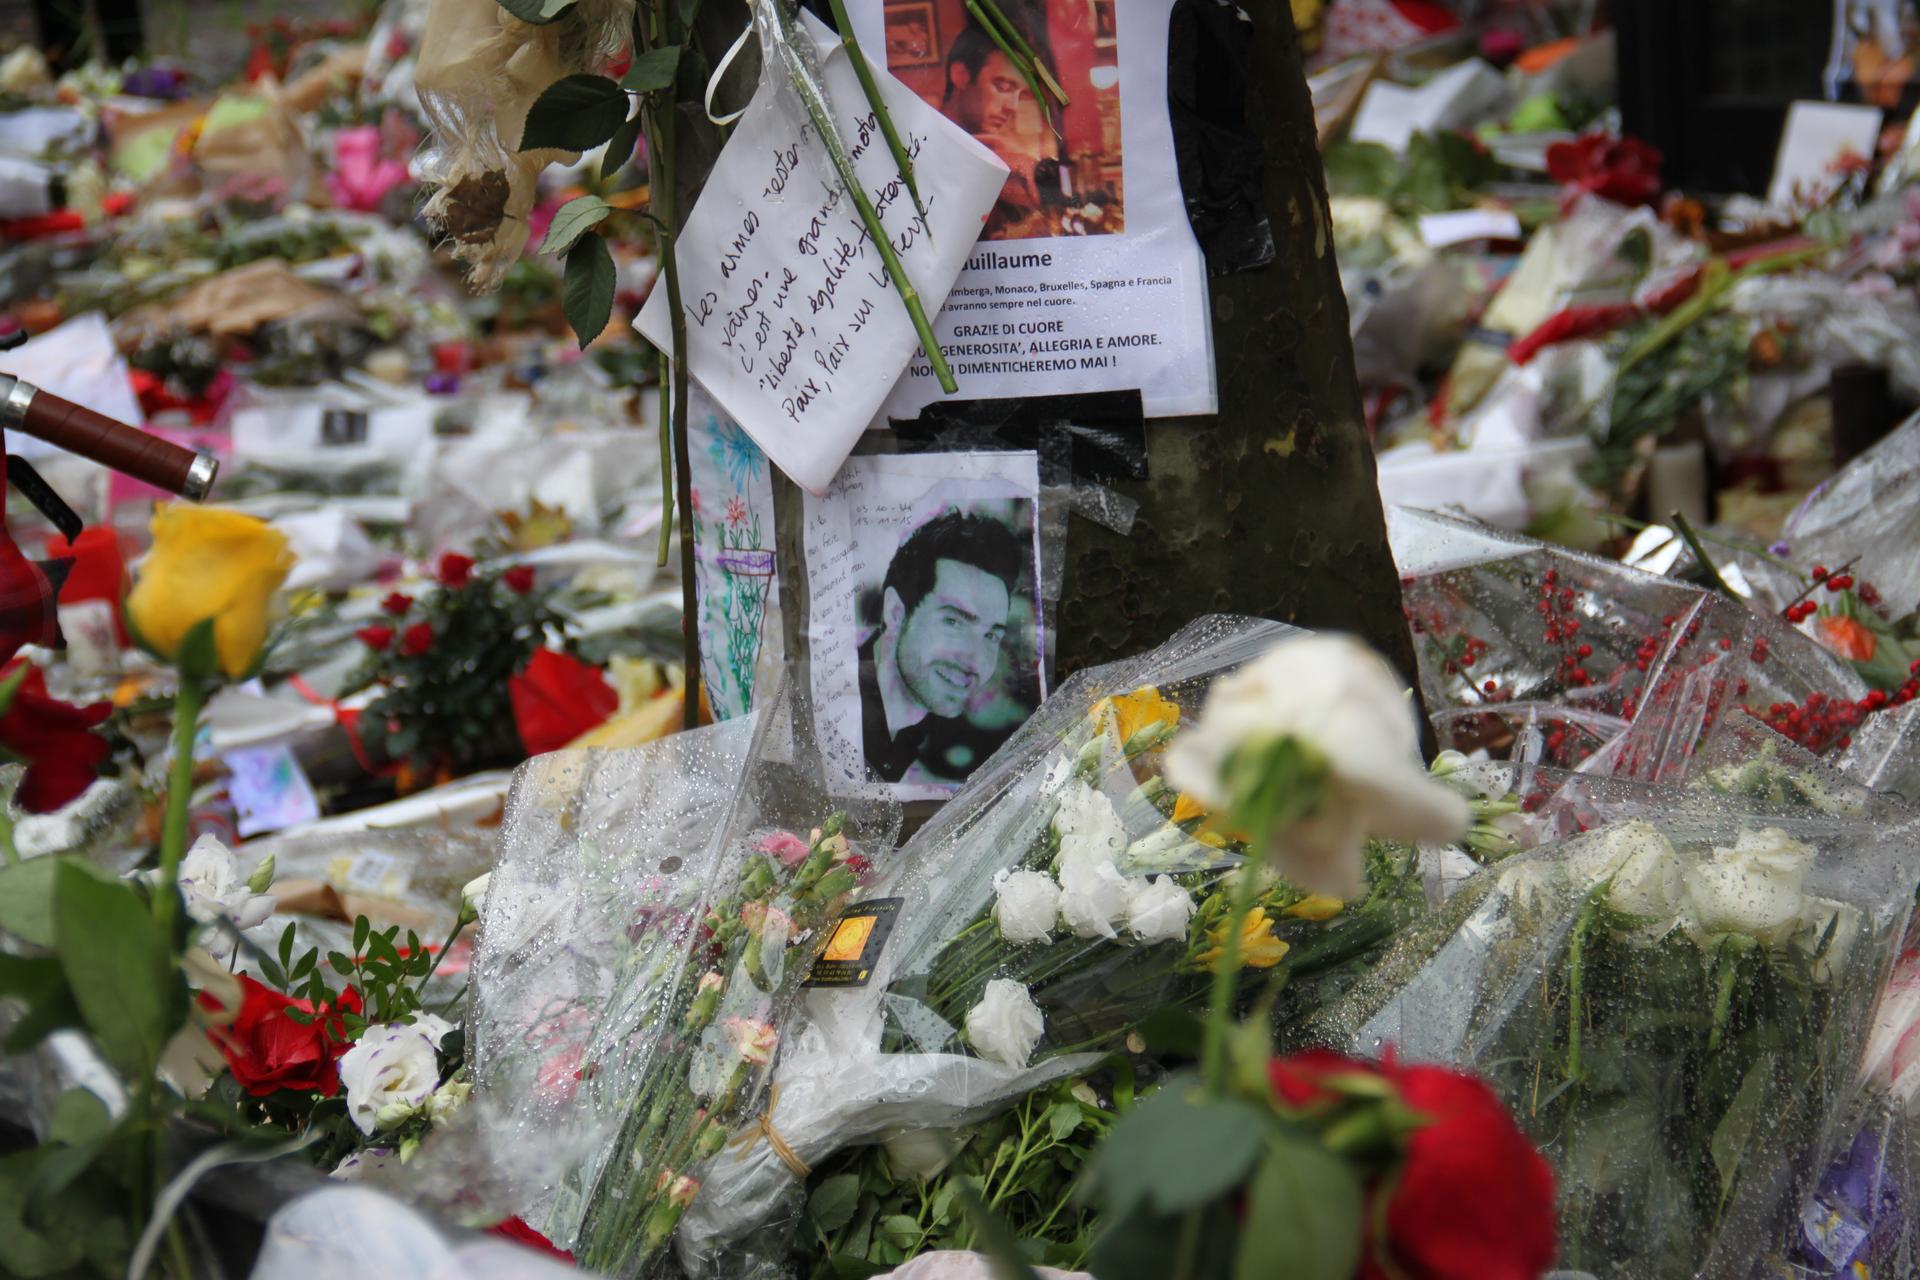 The patio in Paris where cafegoers were shot dead on November 13 is now a sea of bouquets, notes and photos of victims.